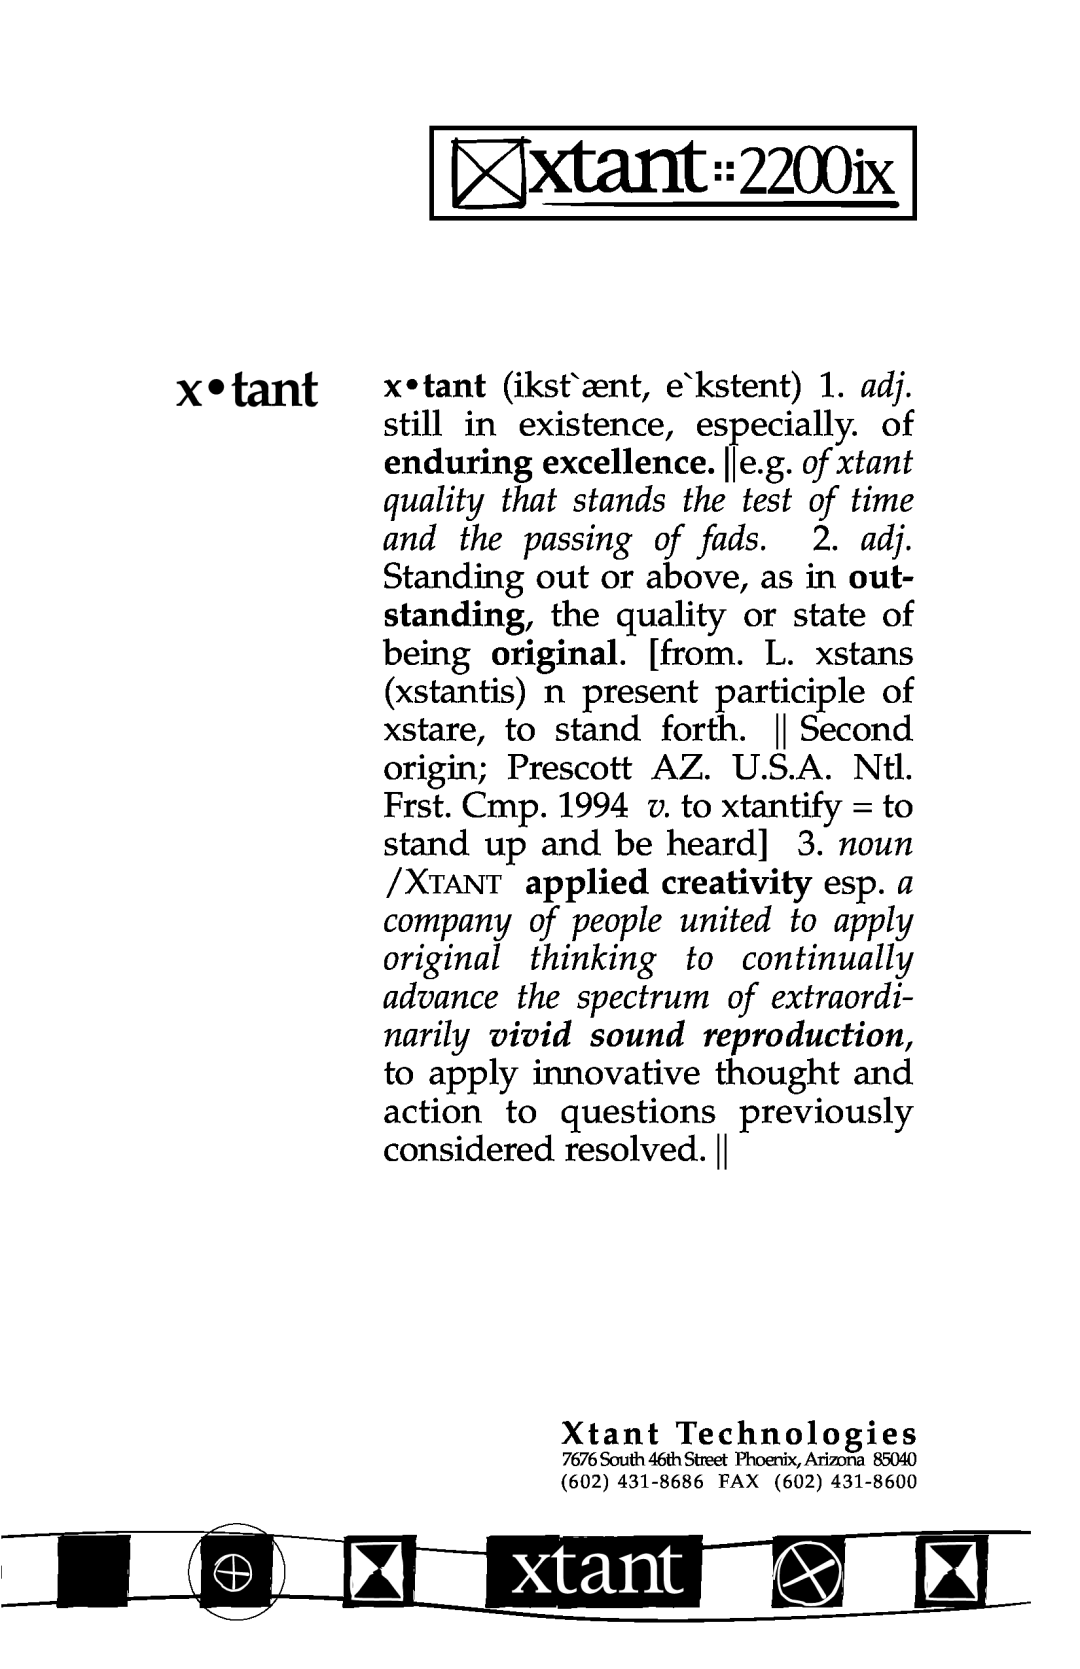 Xtant 2200ix enduring excellence. e.g. of xtant, quality that stands the test of time, and the passing of fads. 2. adj 